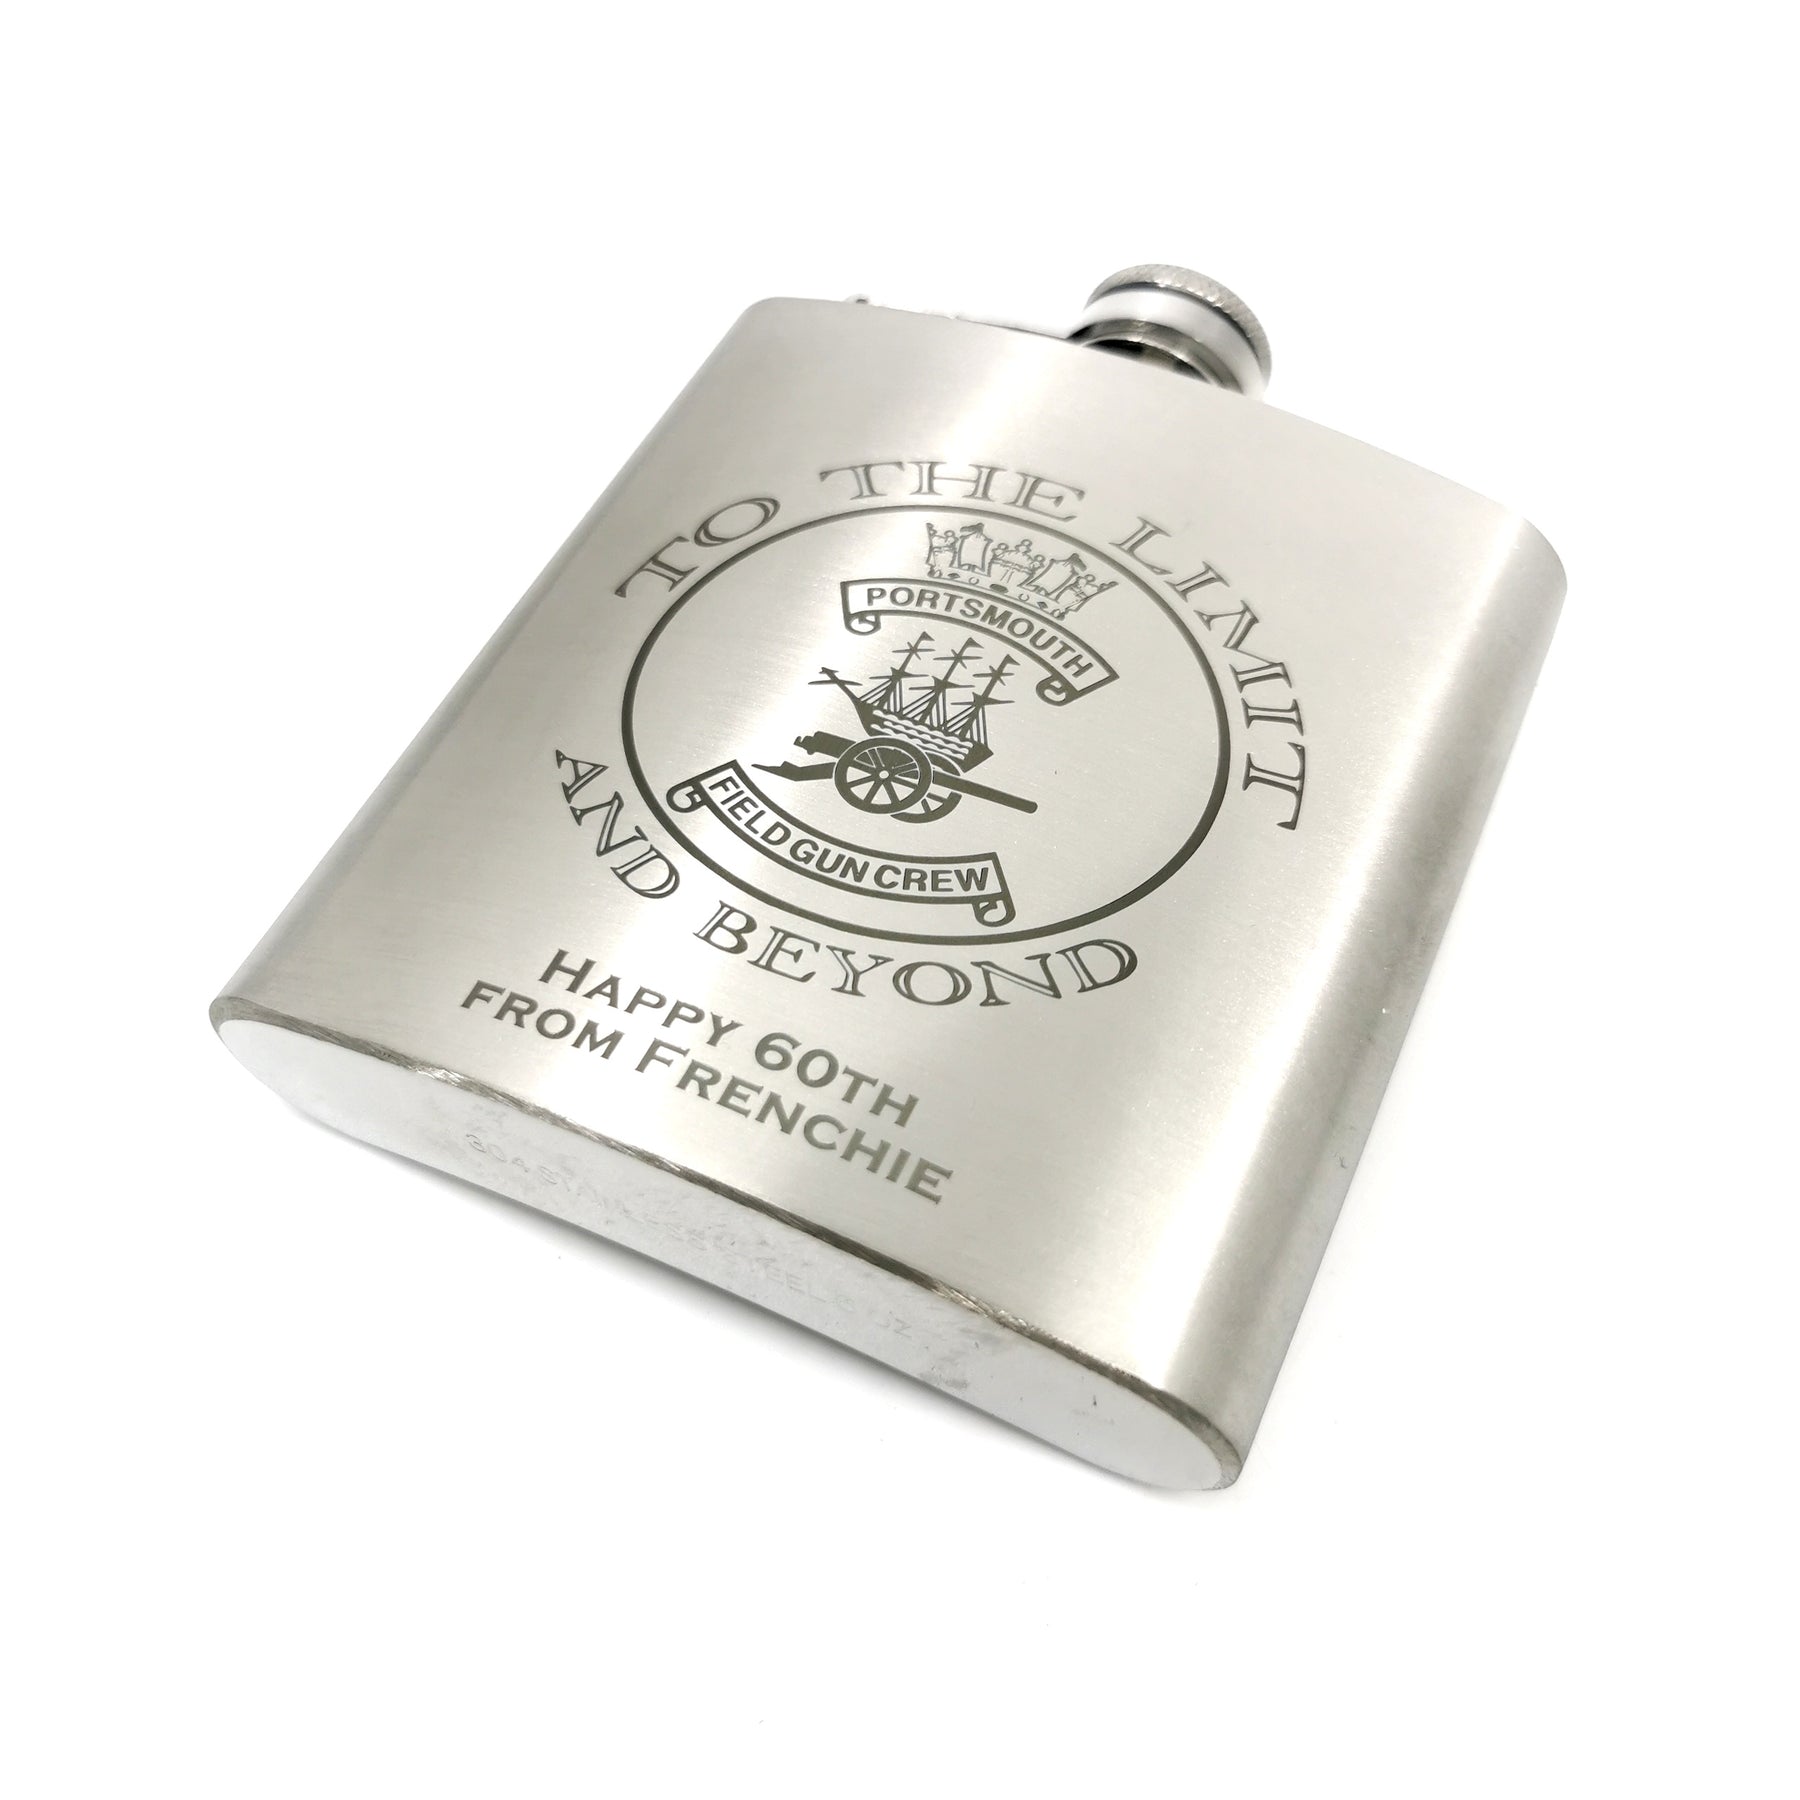 Brushed Steel Hip flask and gift box set